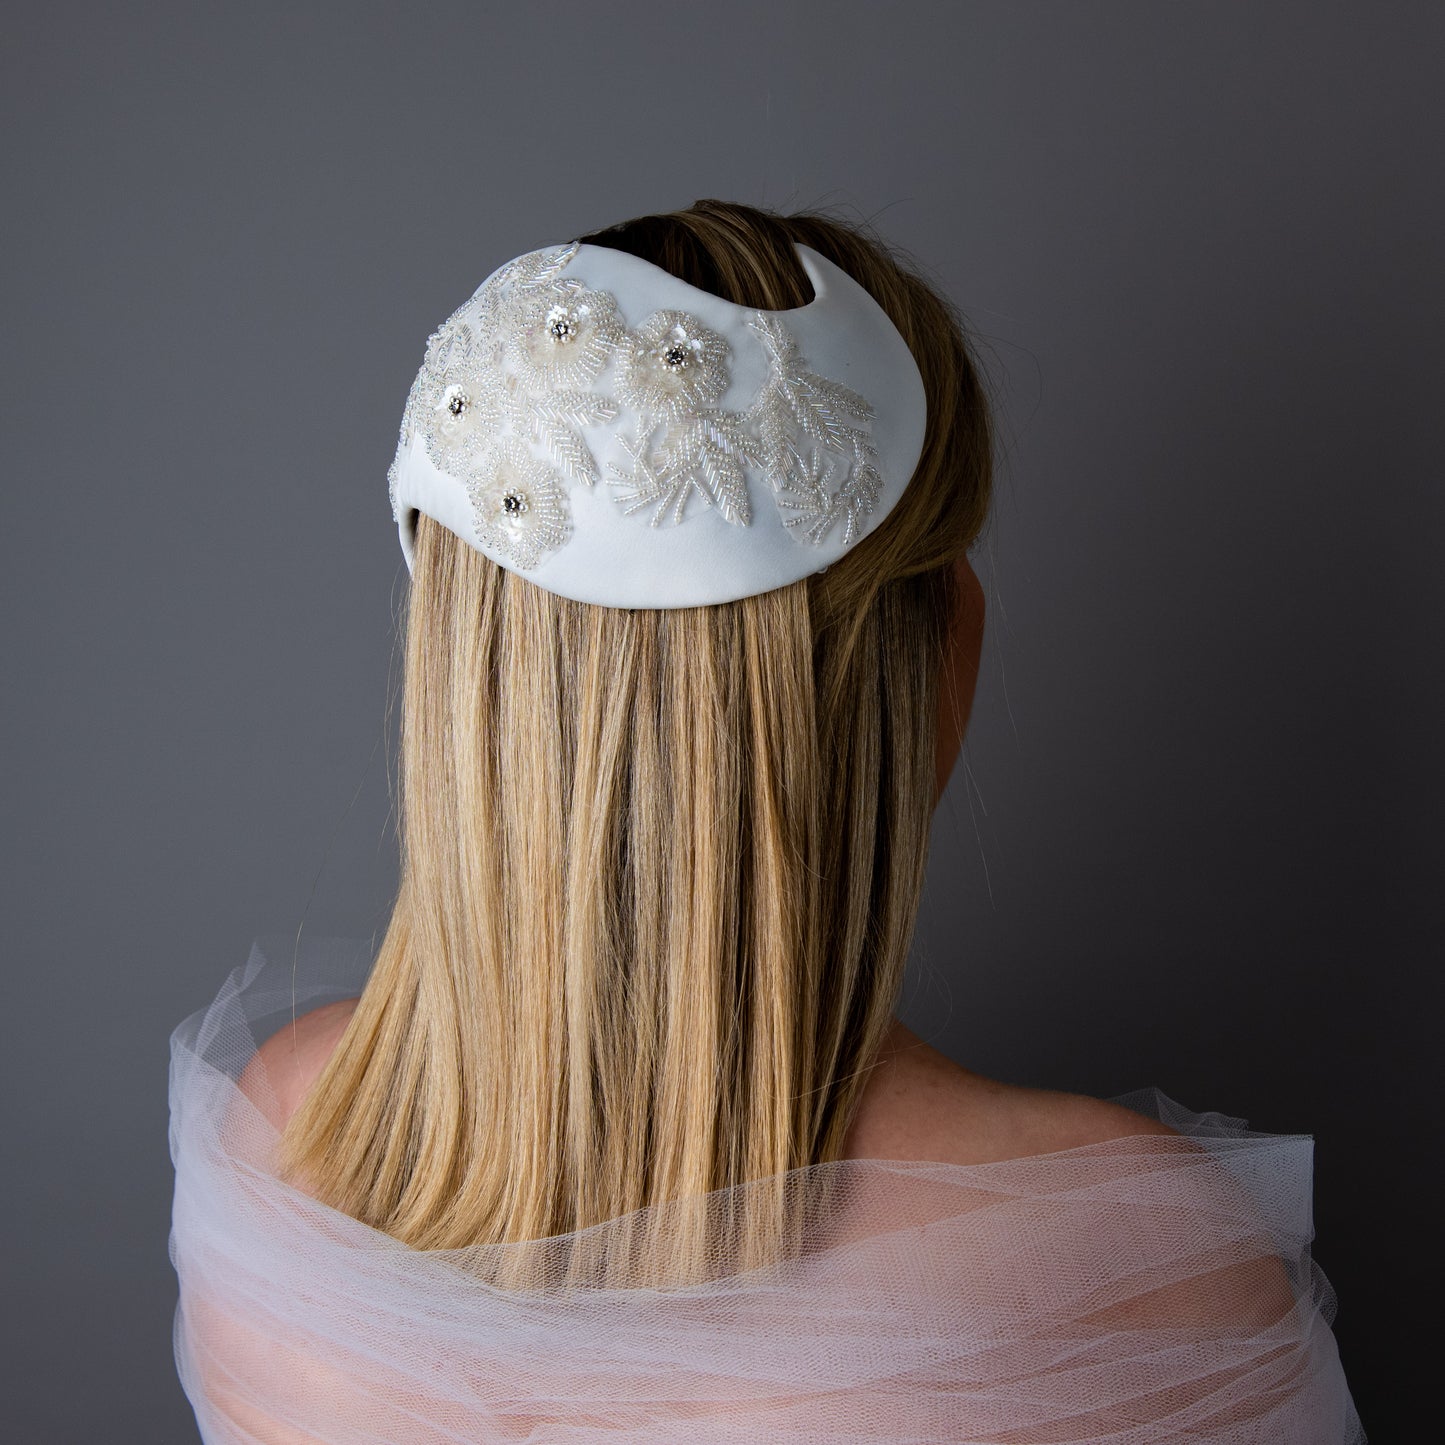 It Had to Be You vintage style bridal headpiece